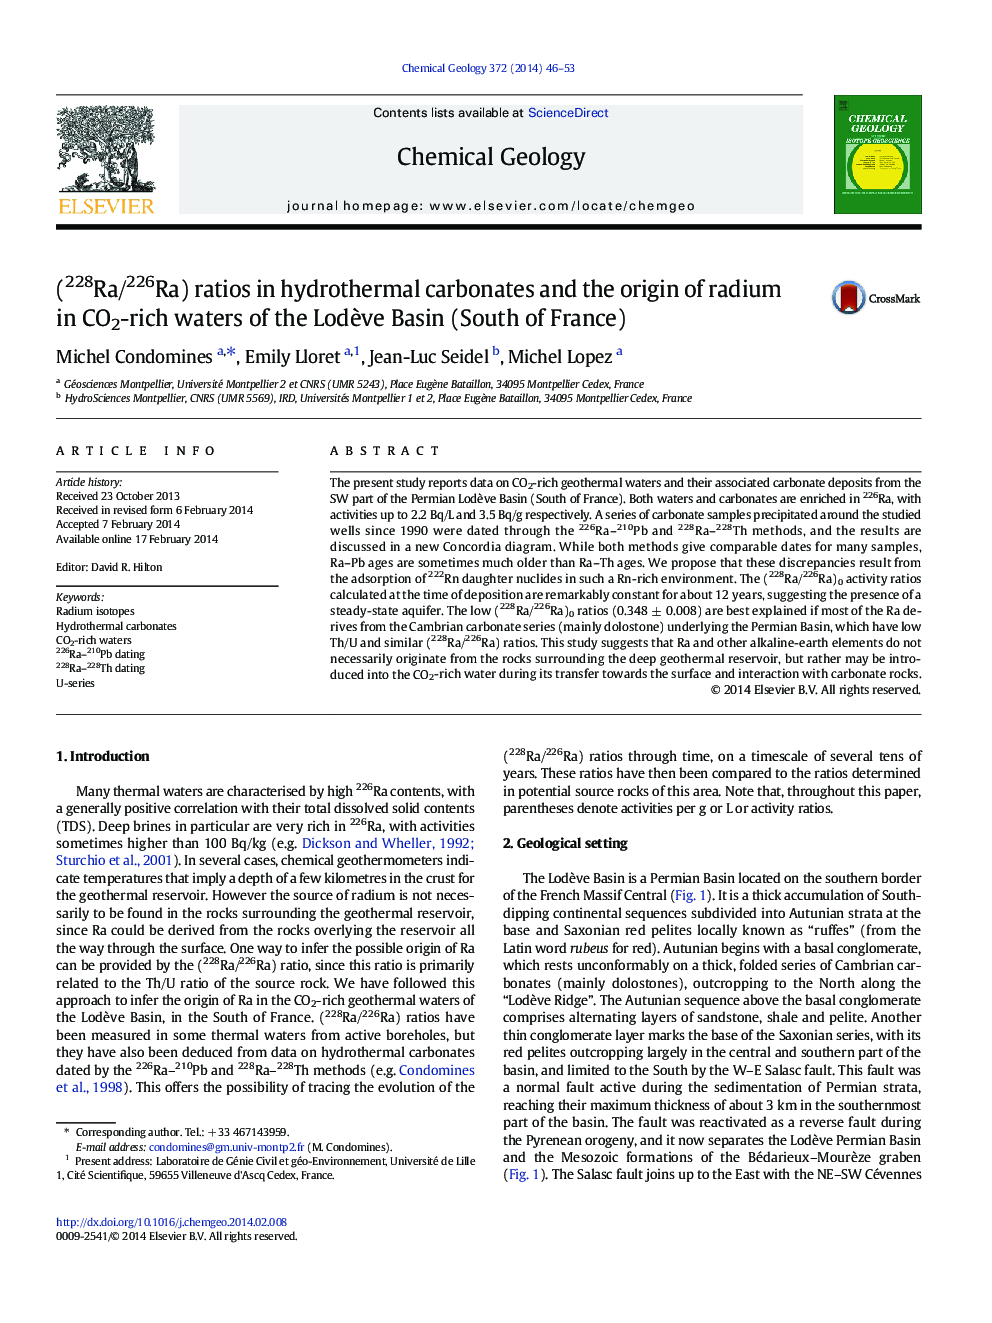 (228Ra/226Ra) ratios in hydrothermal carbonates and the origin of radium in CO2-rich waters of the Lodève Basin (South of France)